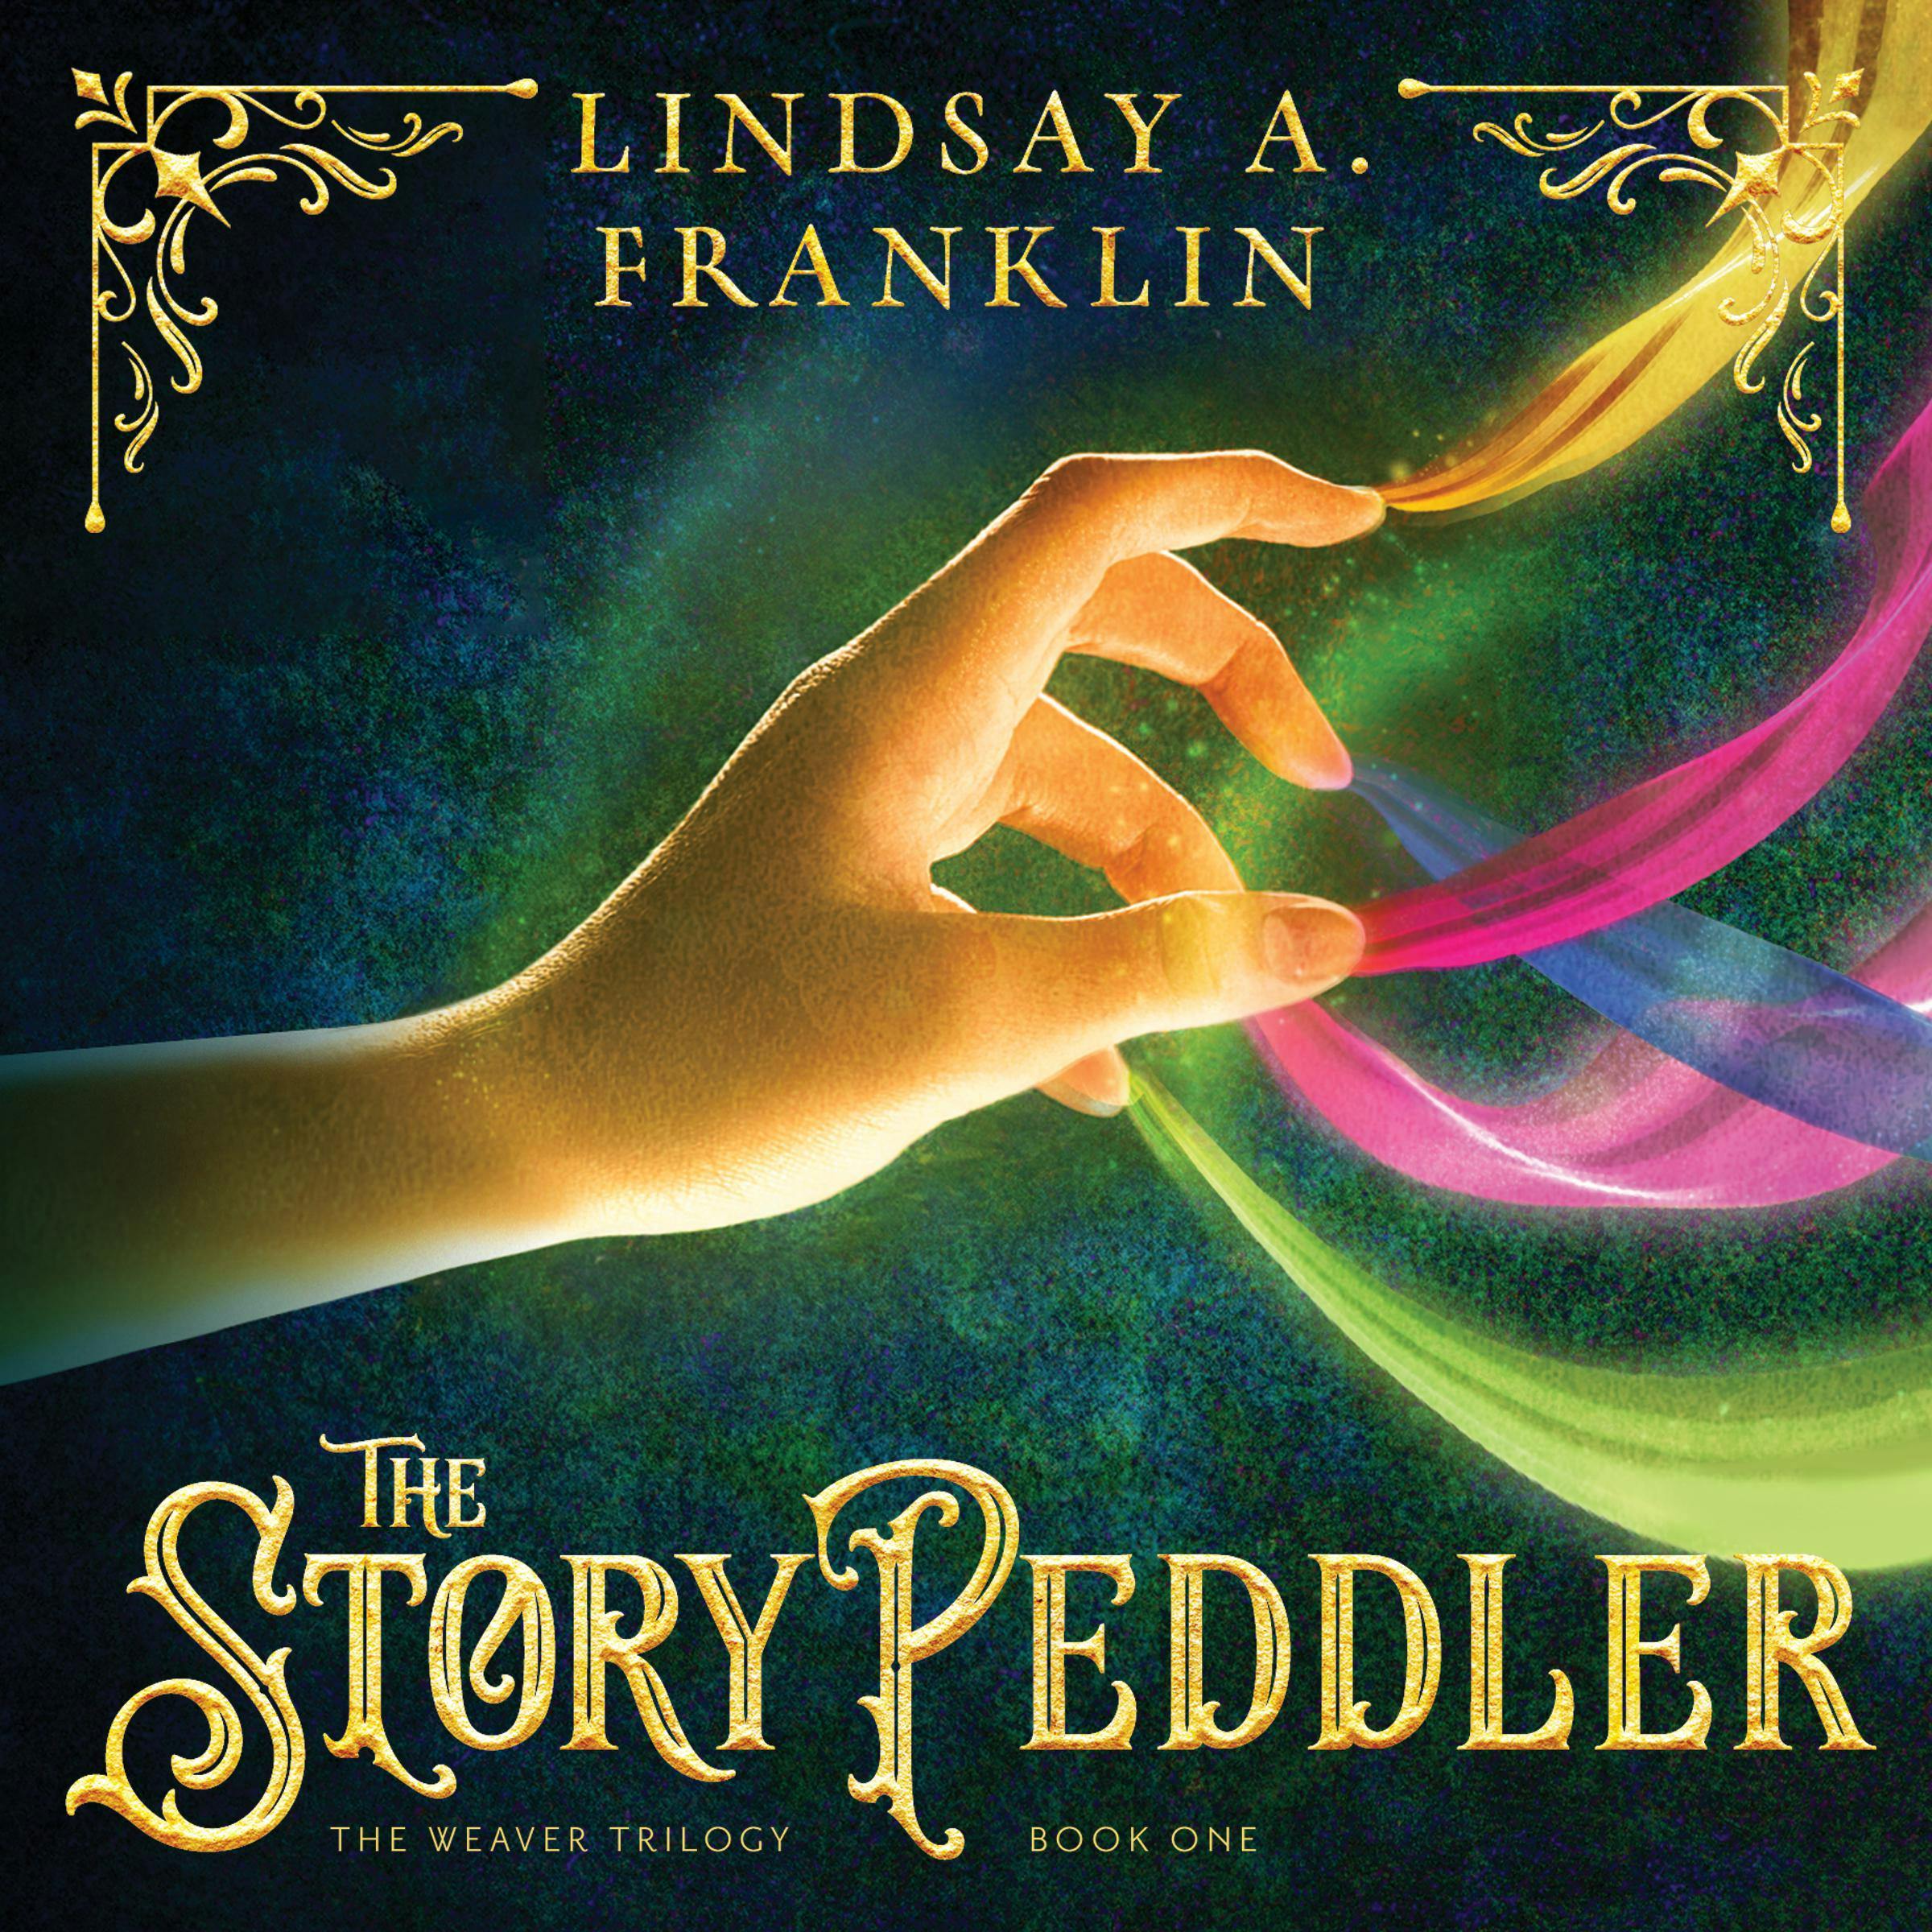 The Story Peddler - undefined